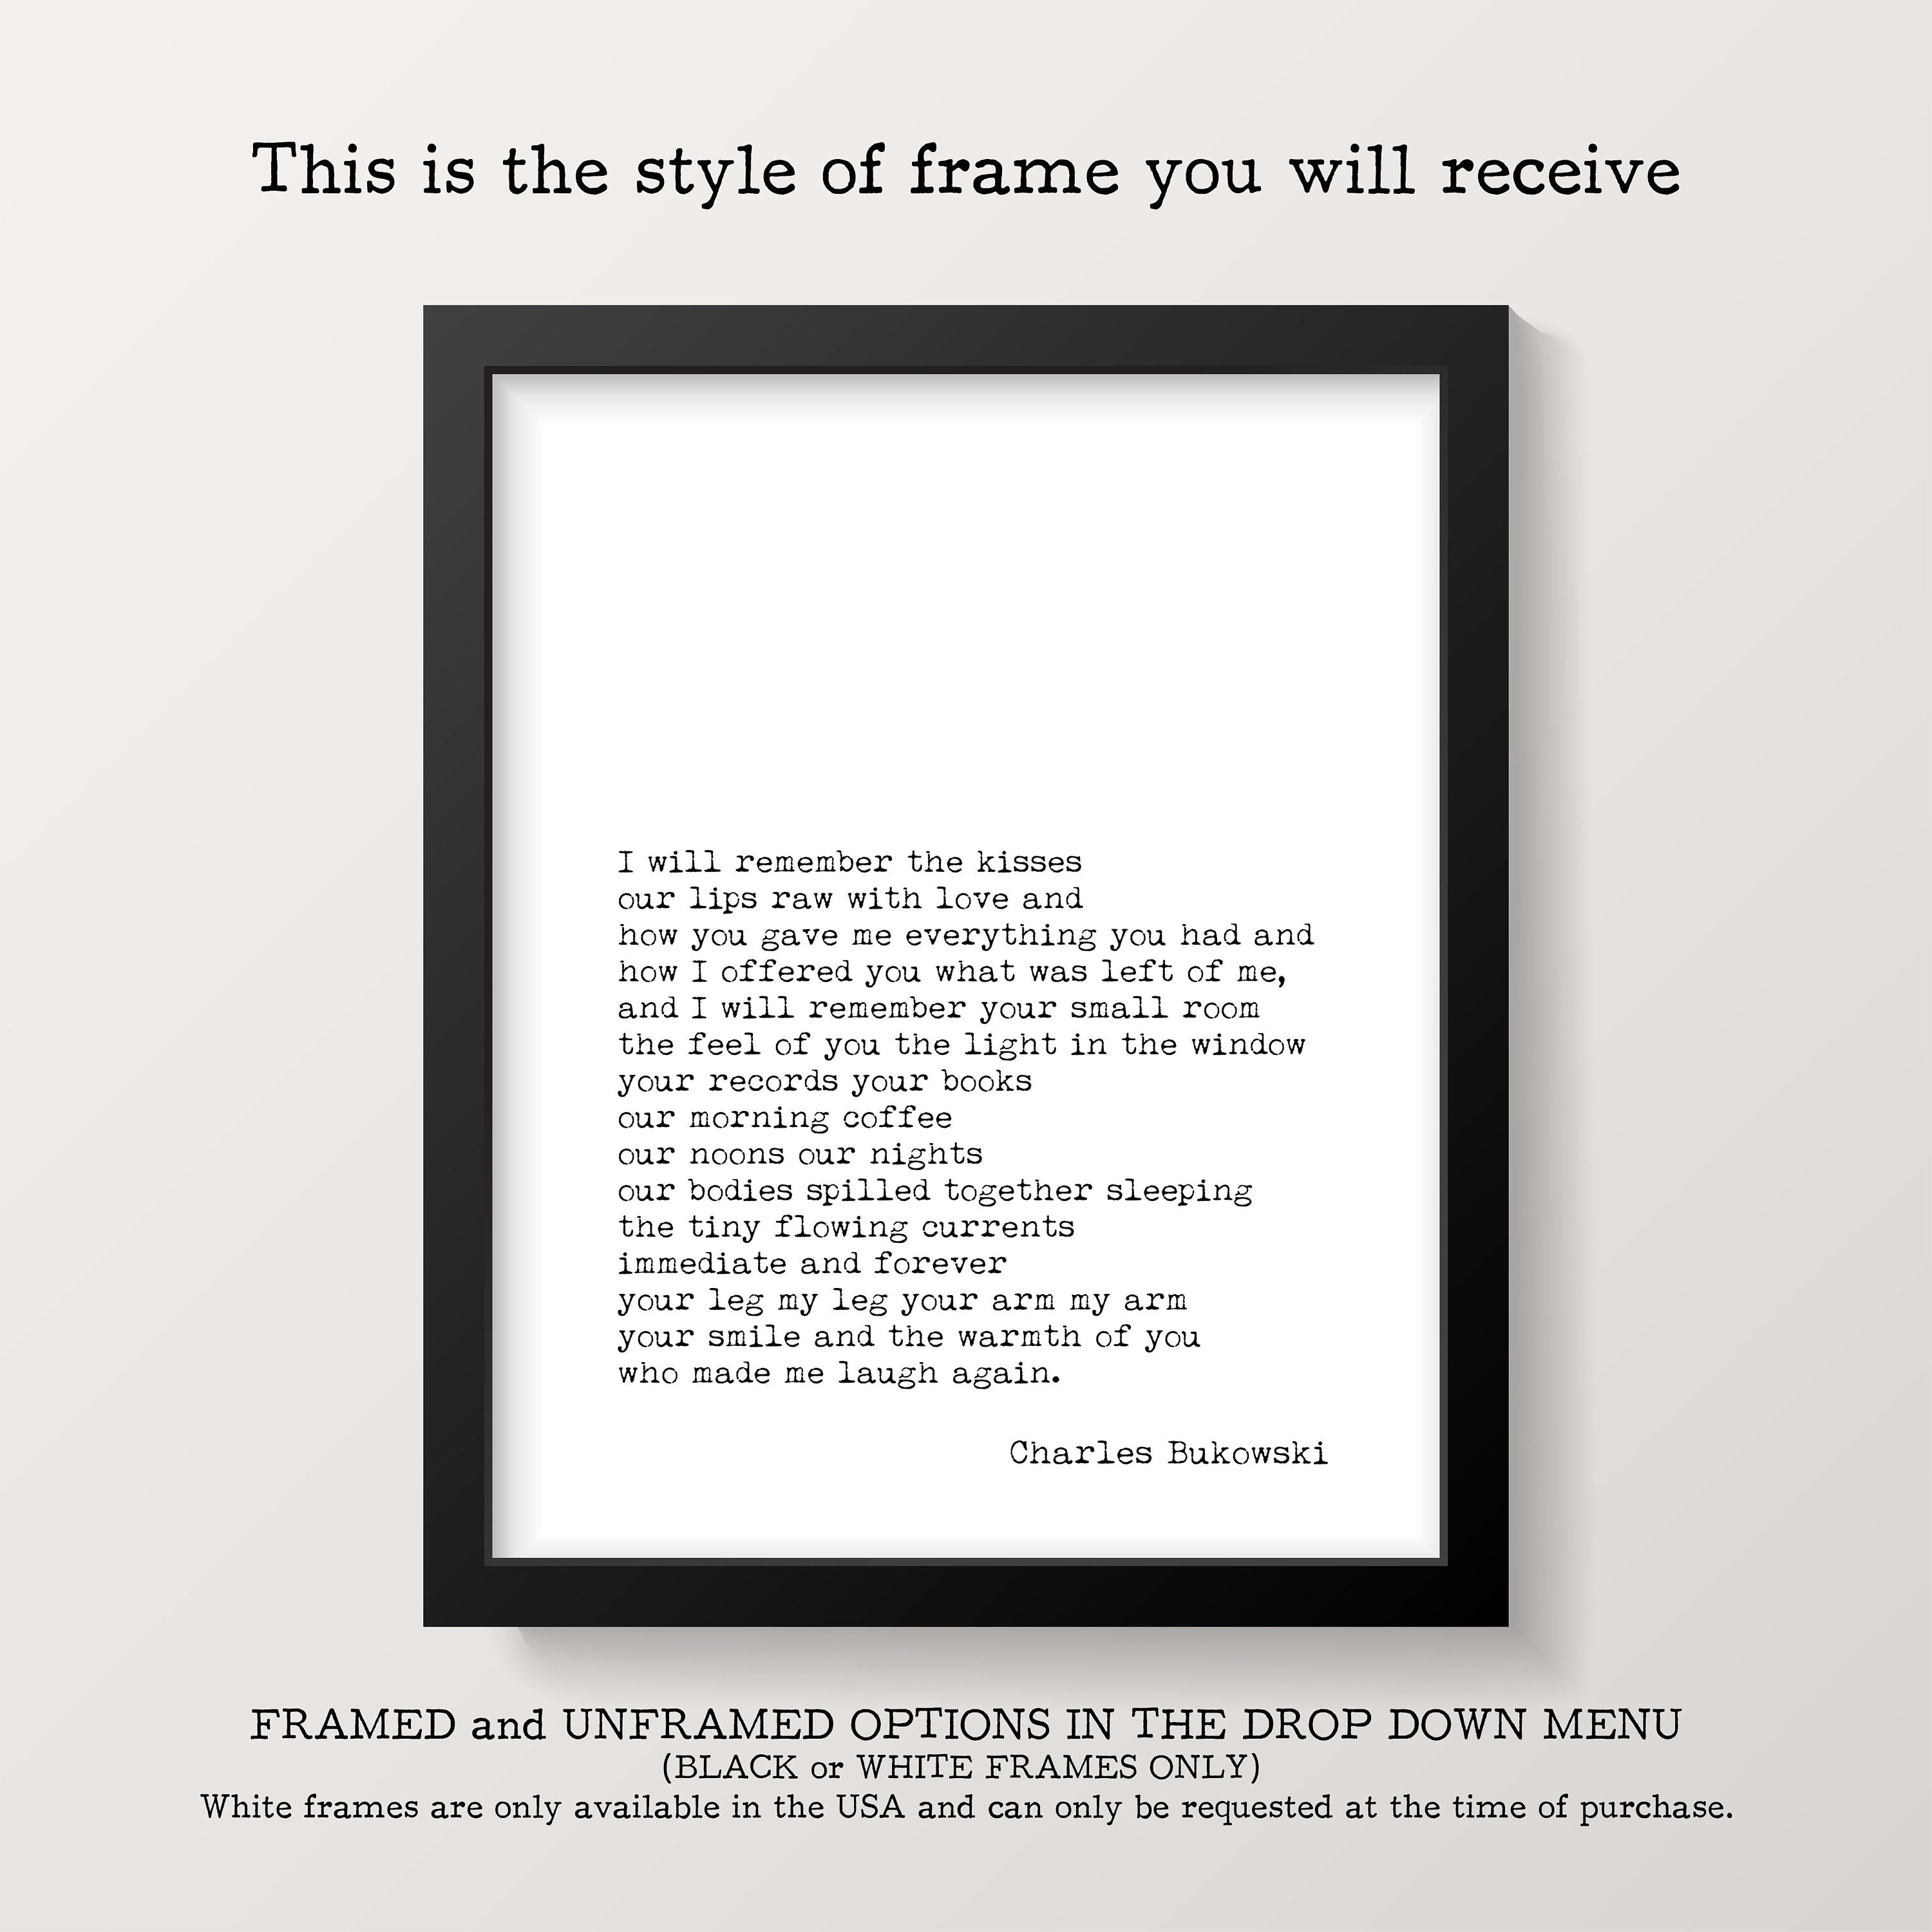 Viktor Frankl Inspiring Art Print, The One Thing You Can’t Take Away From Me from Man's Search For Meaning